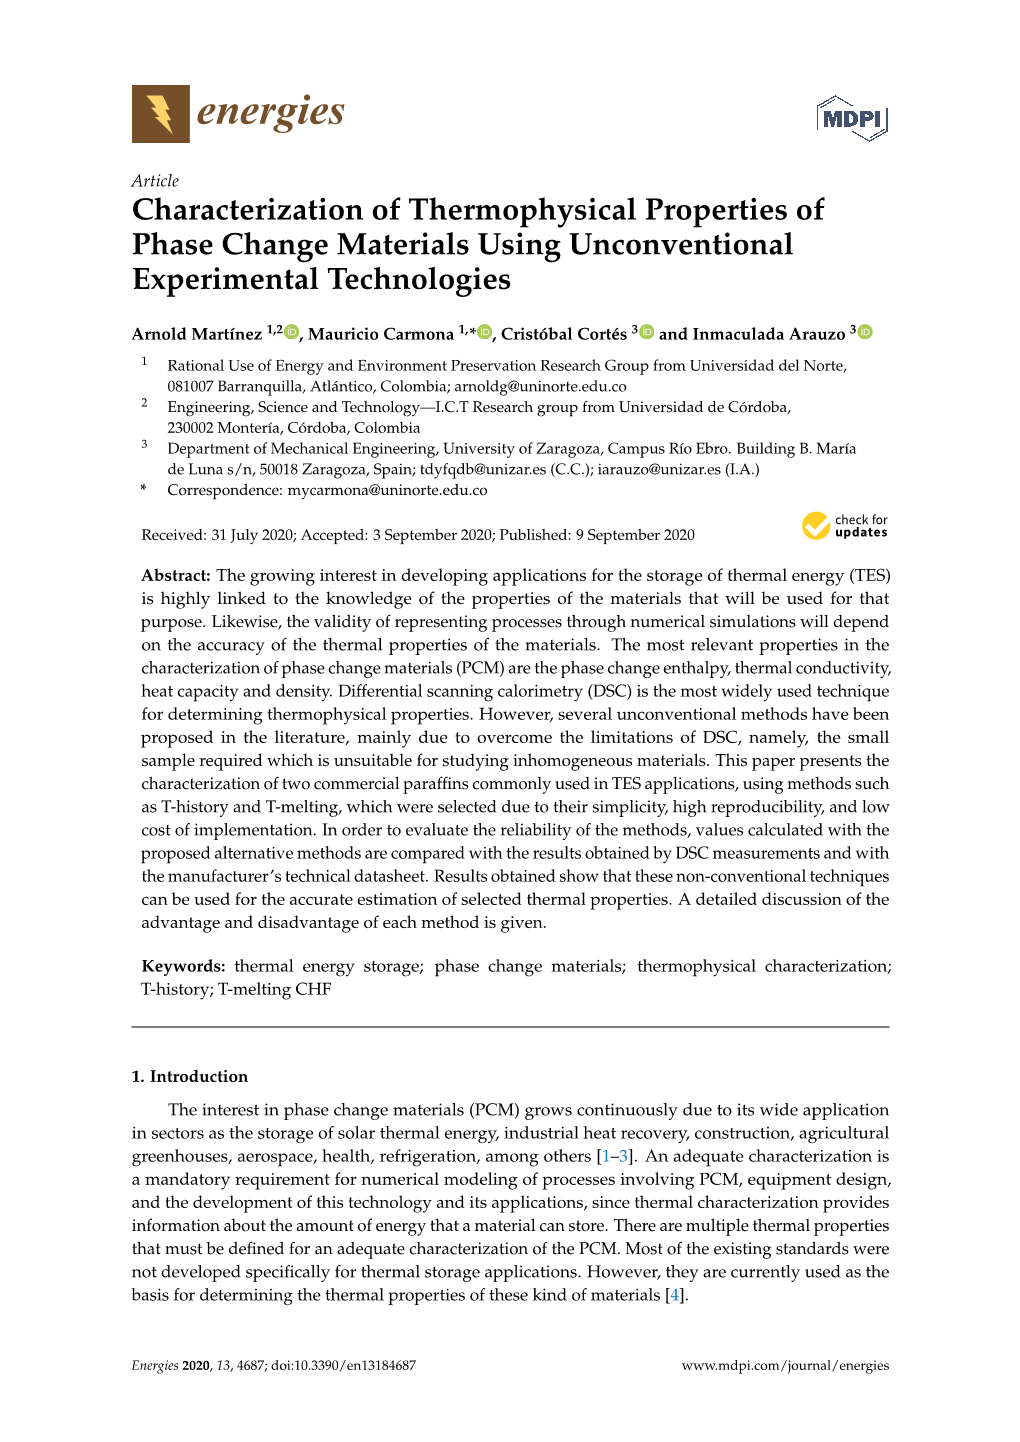 Characterization of Thermophysical Properties of Phase Change Materials Using Unconventional Experimental Technologies